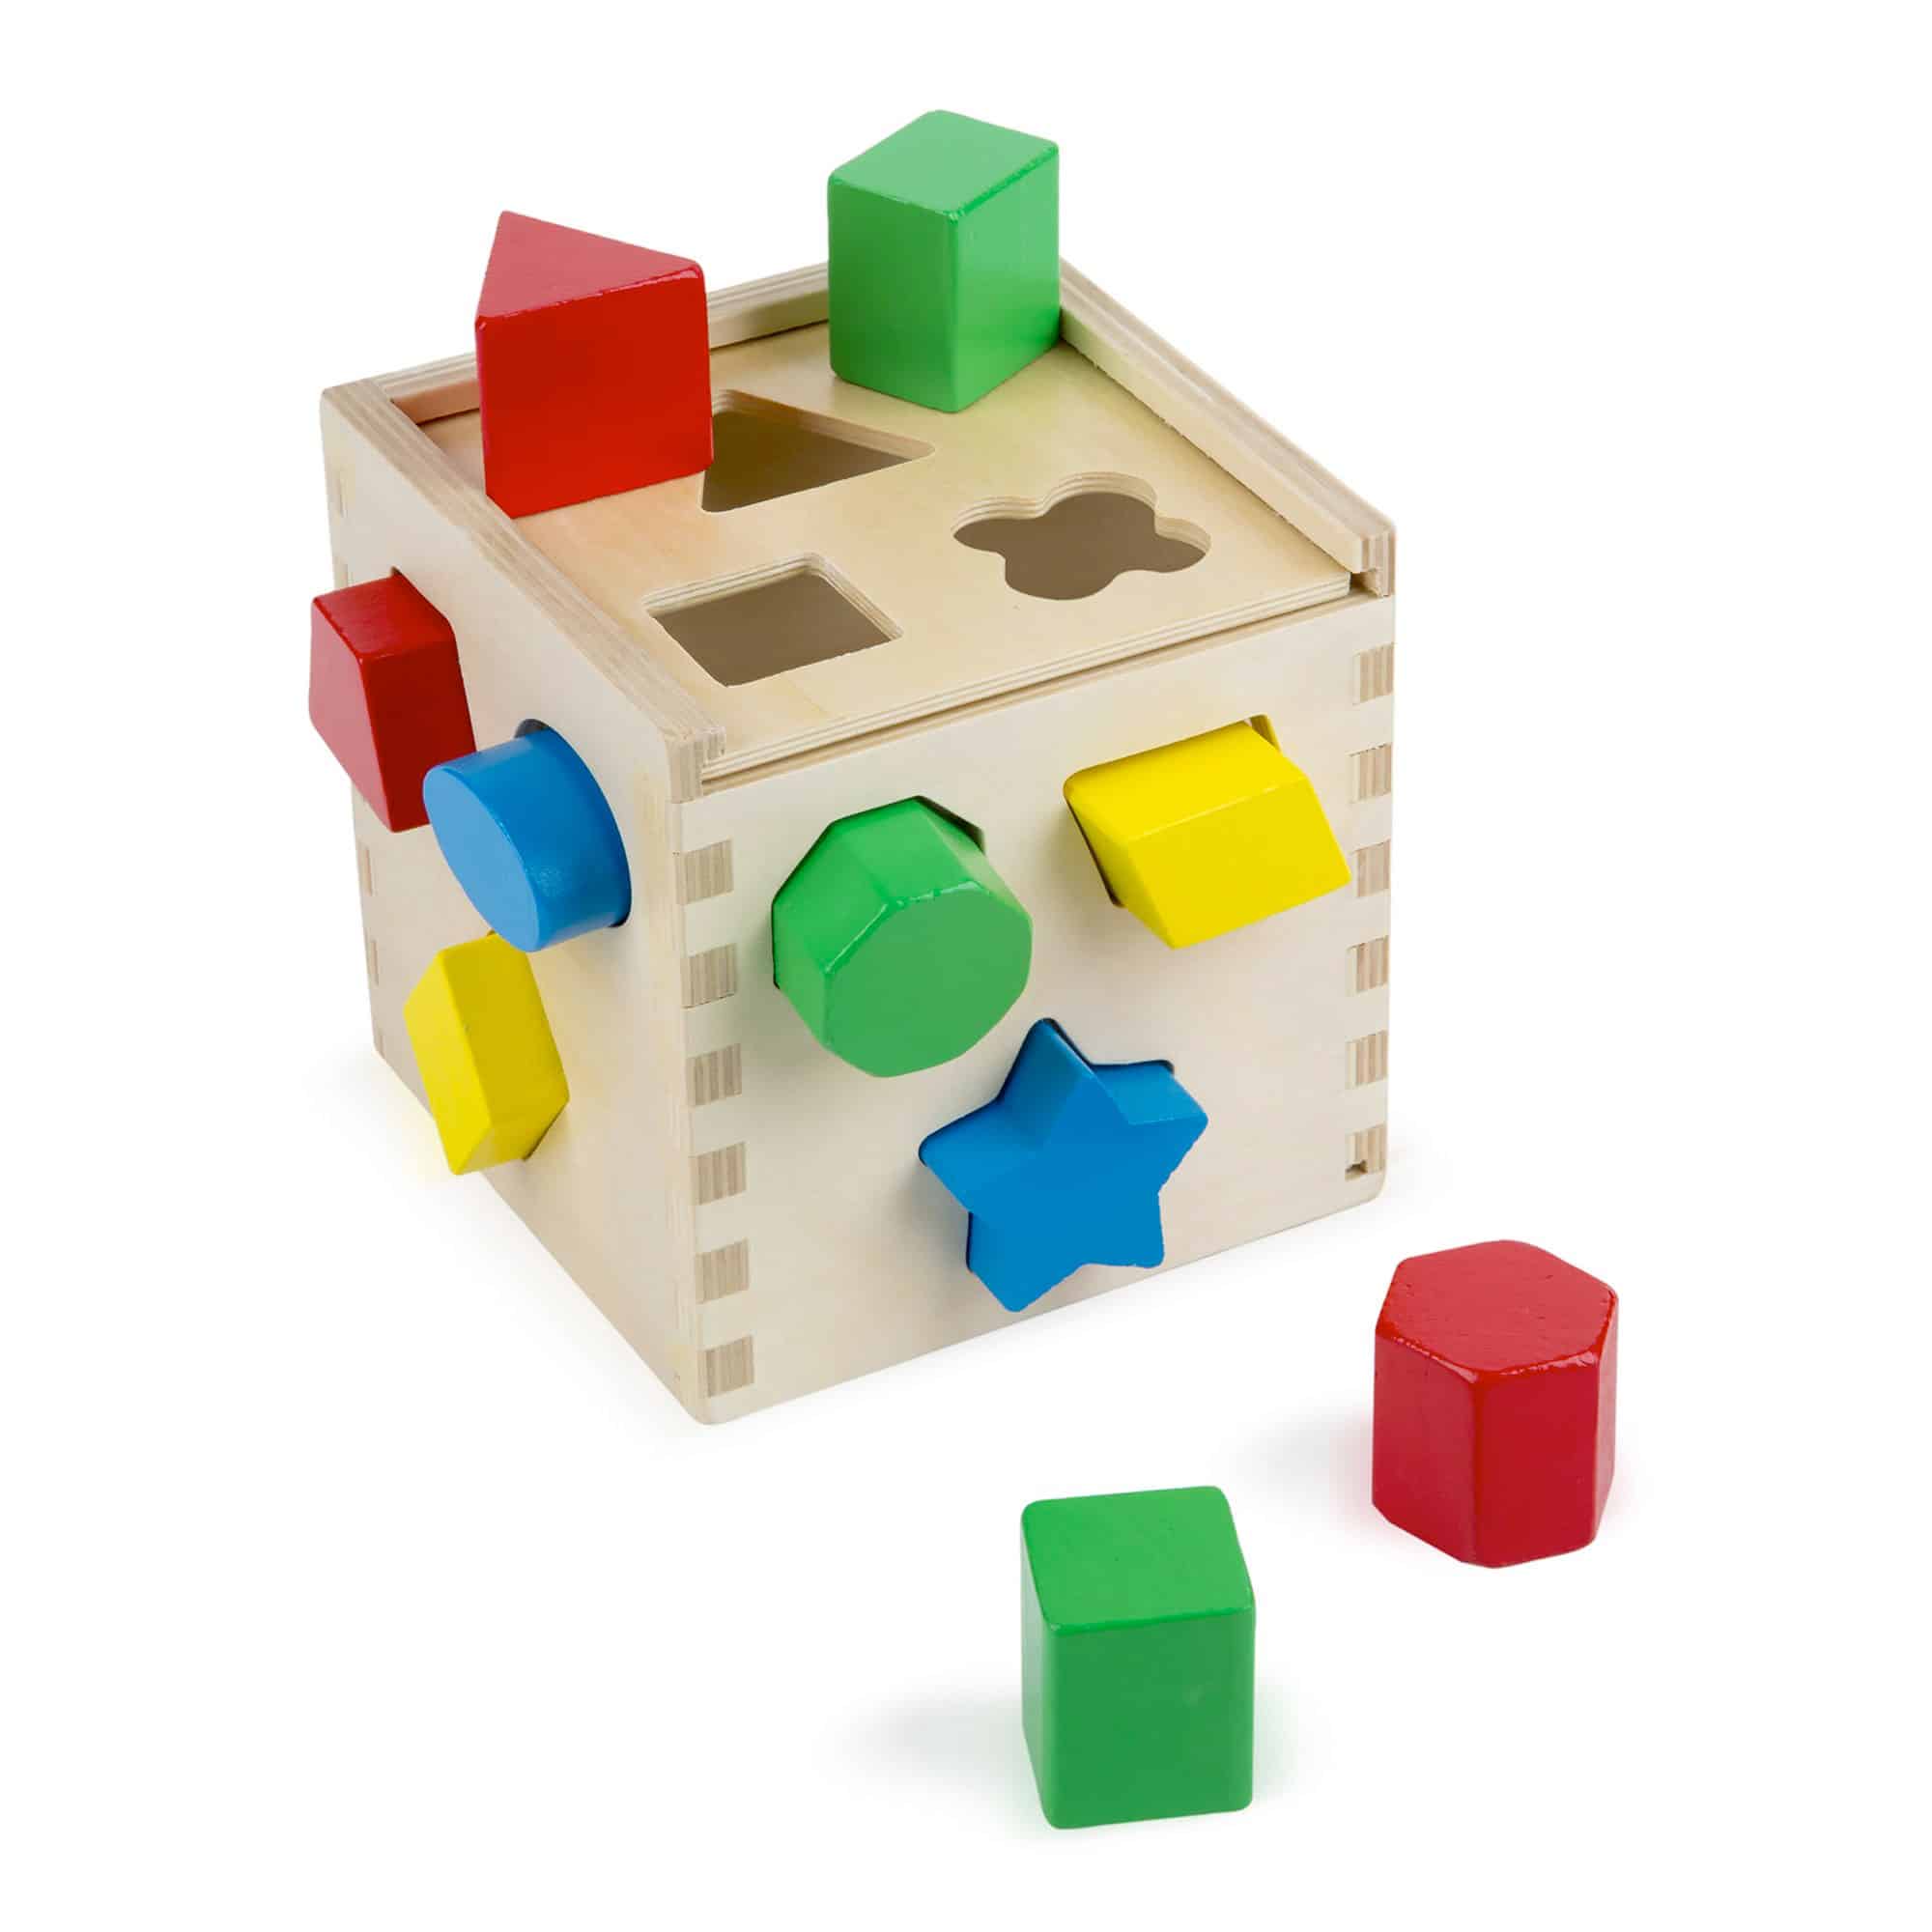 Melissa and Doug - Wooden Shape Sorting Cube